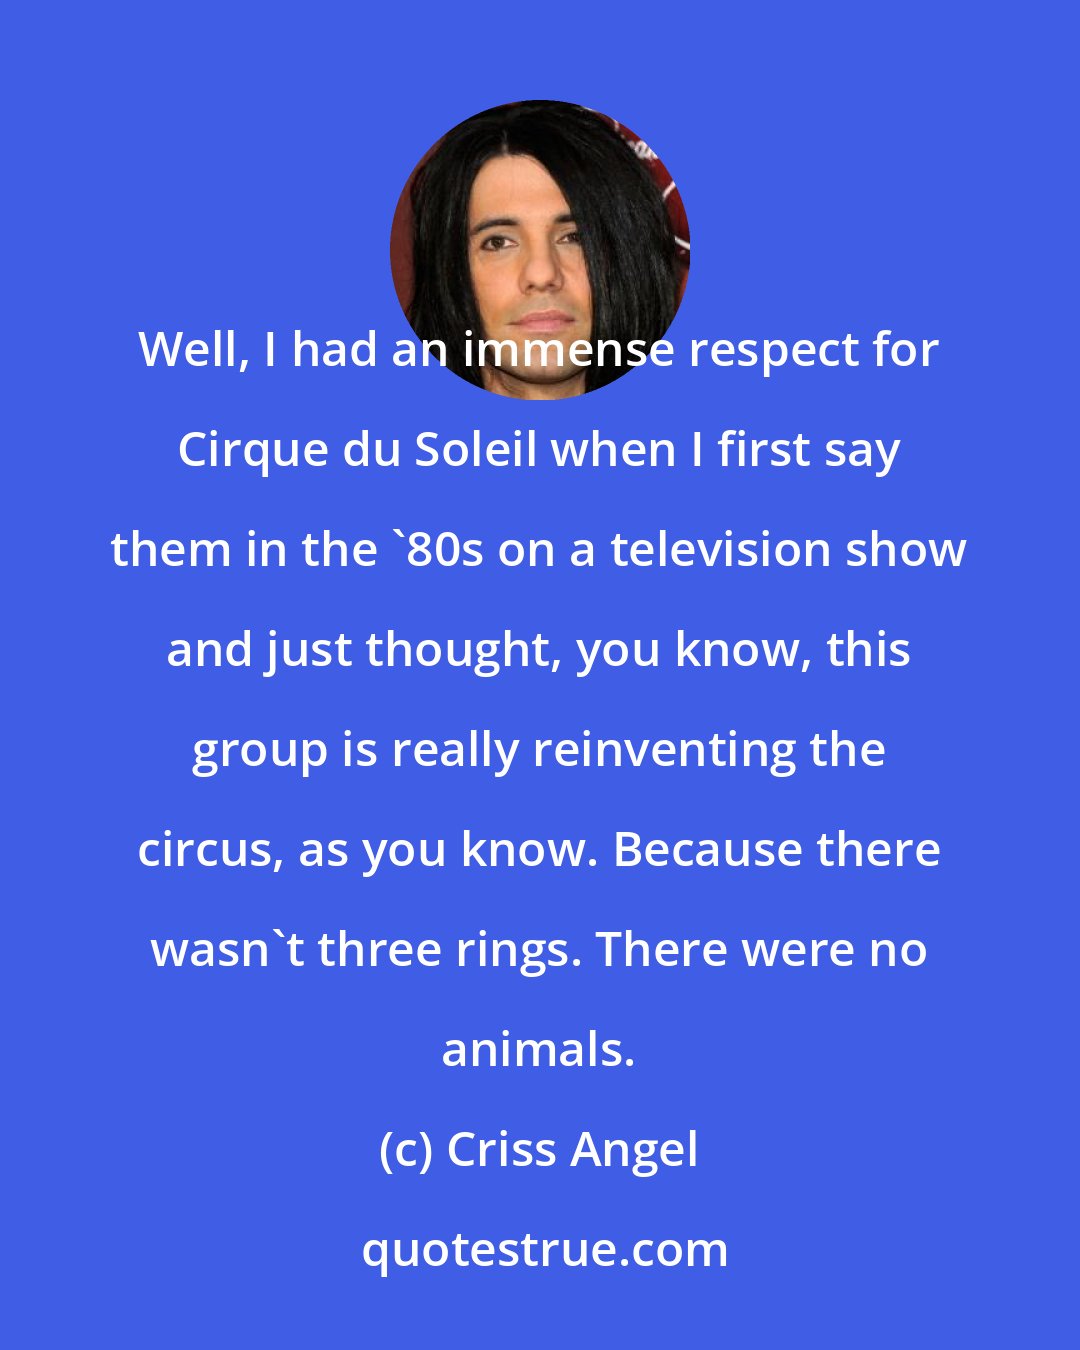 Criss Angel: Well, I had an immense respect for Cirque du Soleil when I first say them in the '80s on a television show and just thought, you know, this group is really reinventing the circus, as you know. Because there wasn't three rings. There were no animals.